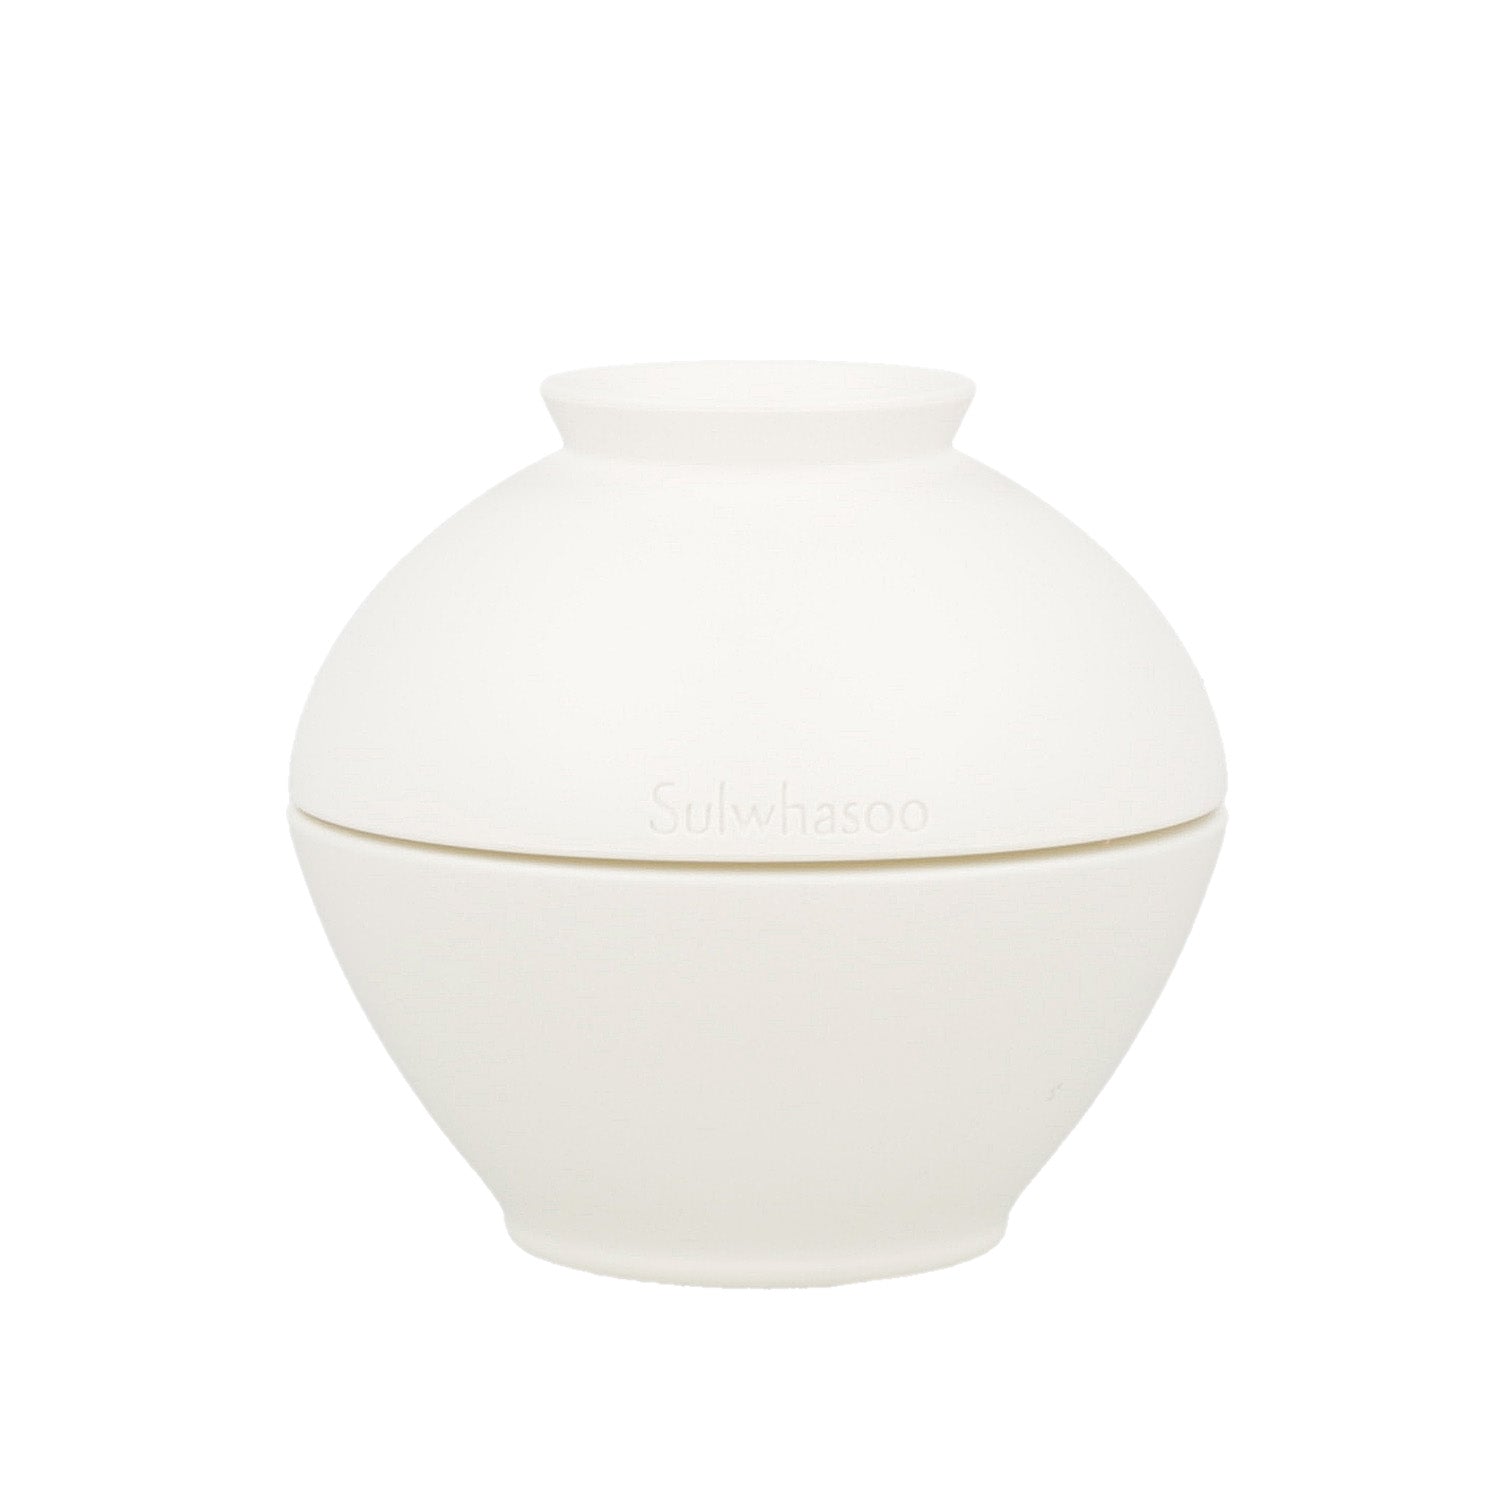 Sulwhasoo Ultimate S Eye Cream 20ml: Hydrating and anti-aging eye cream for radiant, youthful-looking eyes.